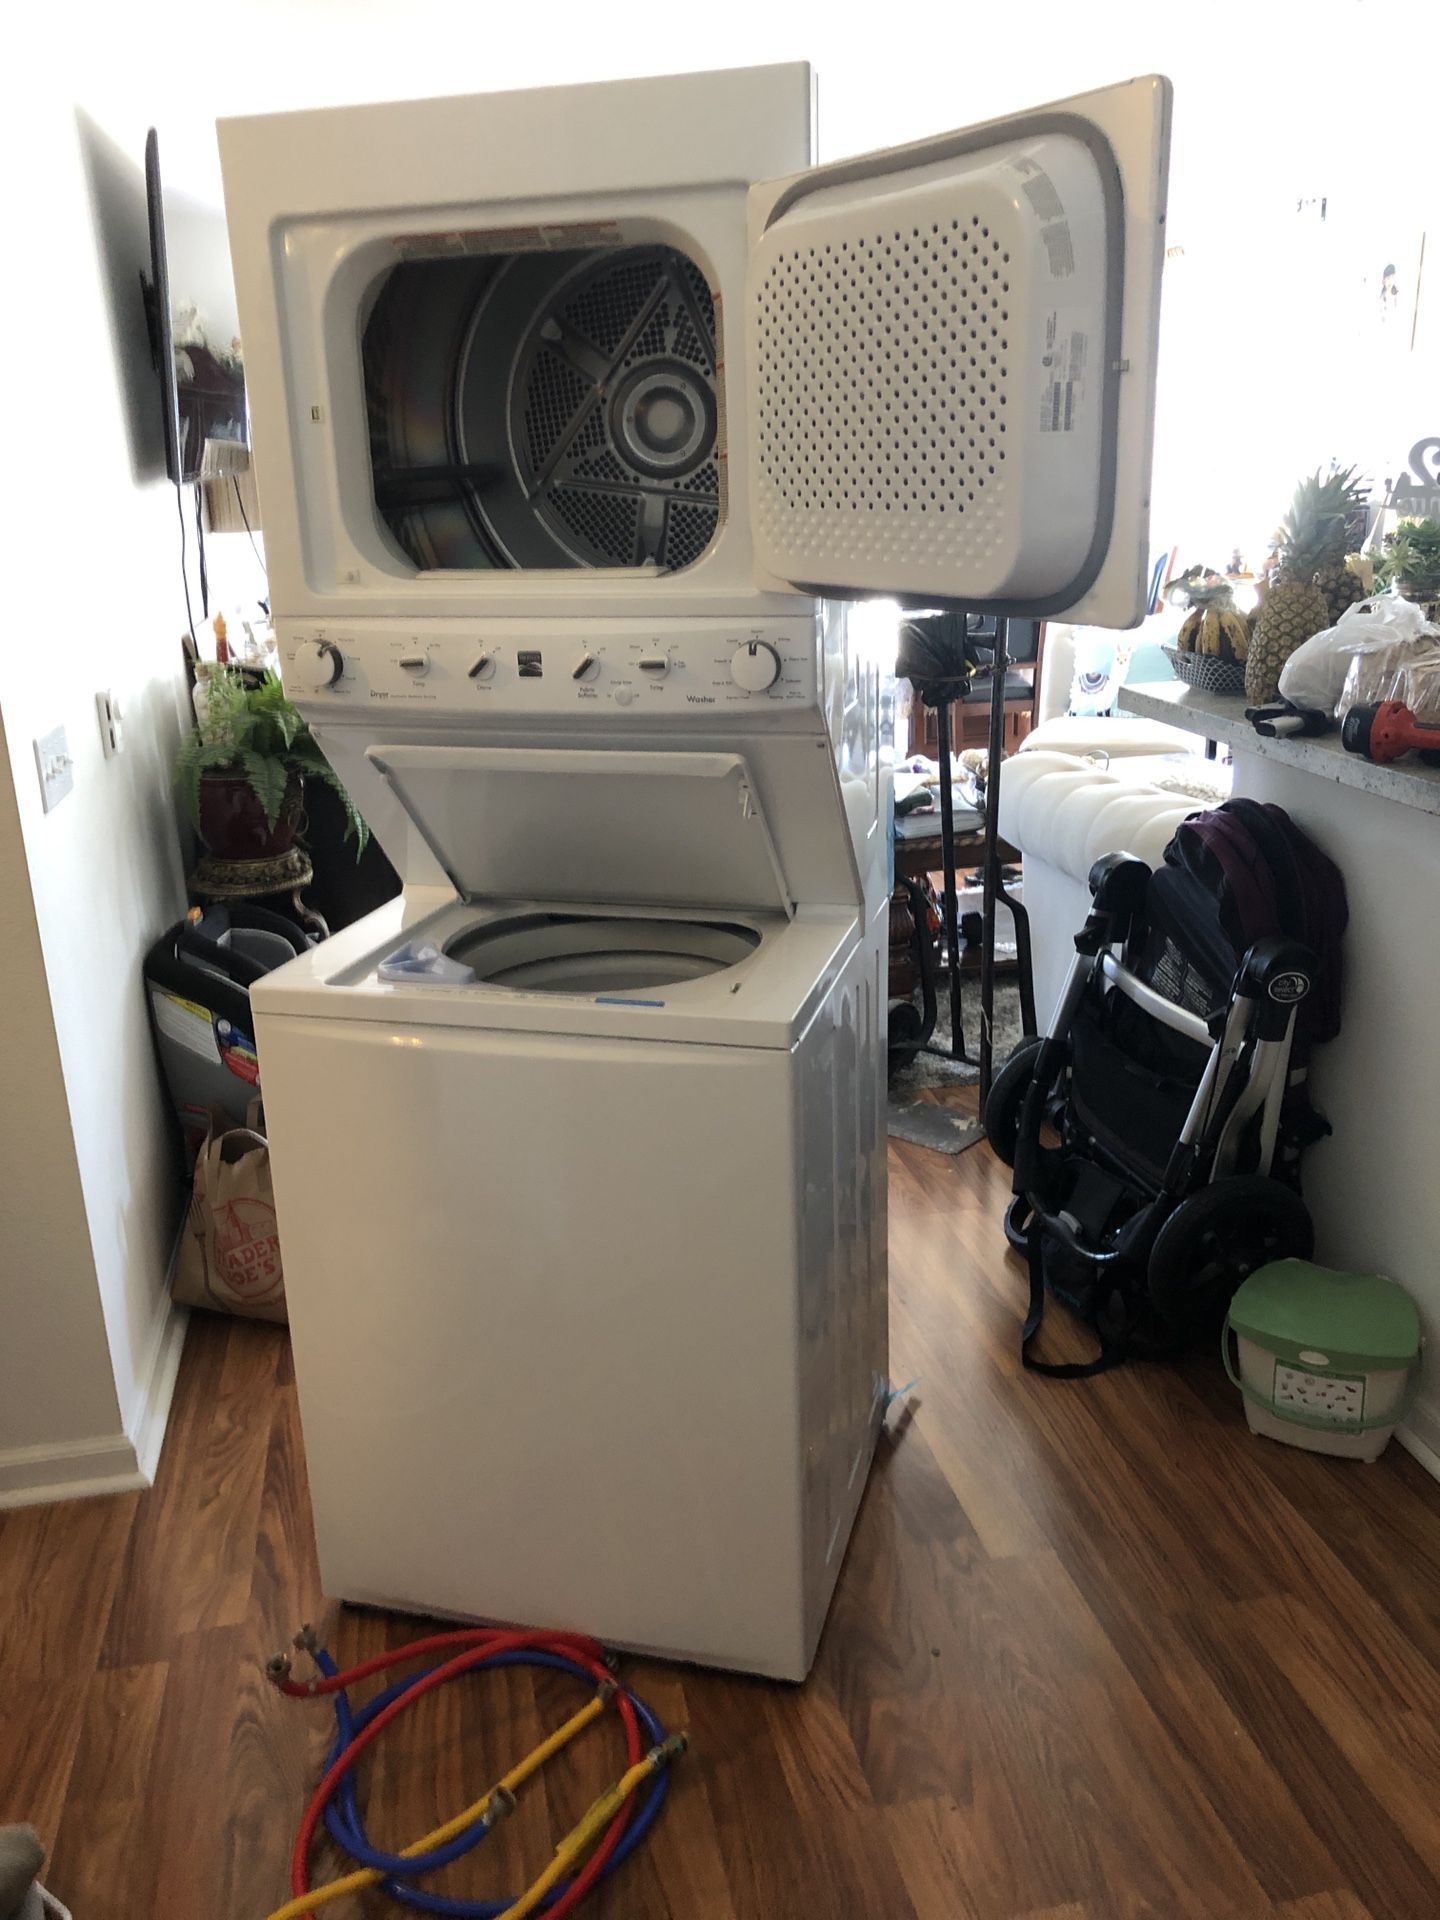 2019 Kenmore washer & Gas dryer